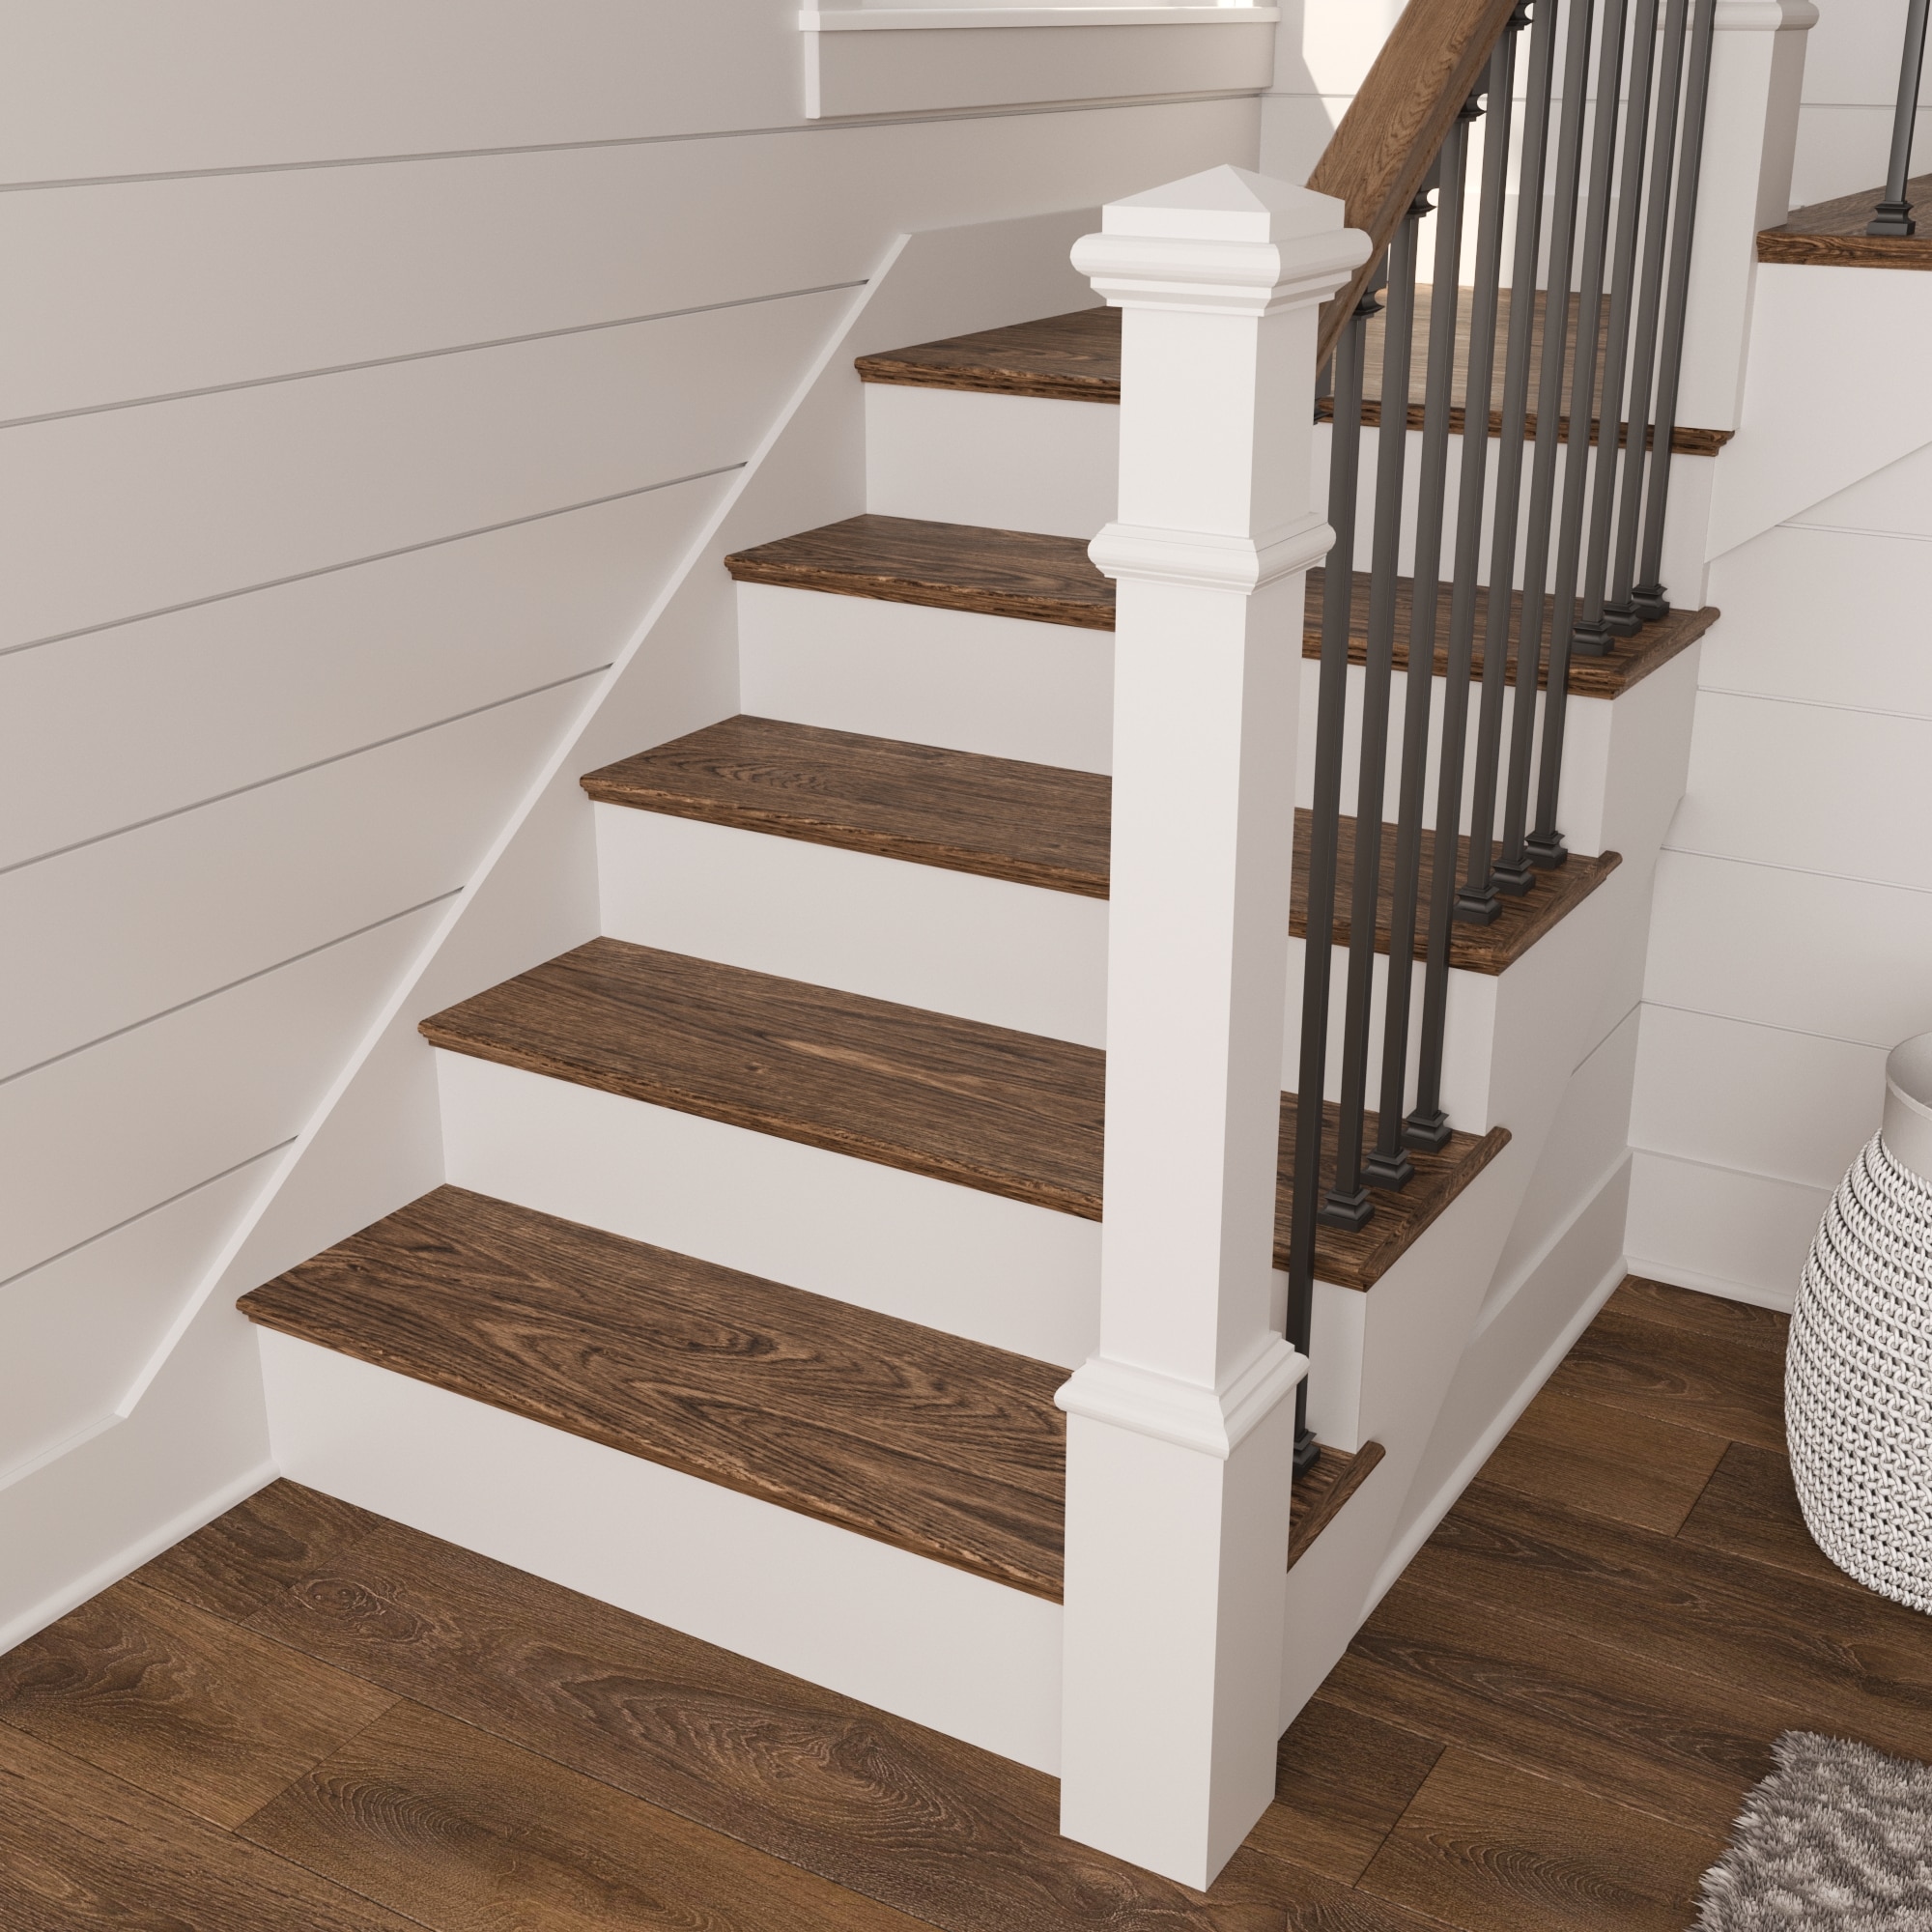 Oak Stairs steps Cladding Kit For Stairs,13 risers and treads